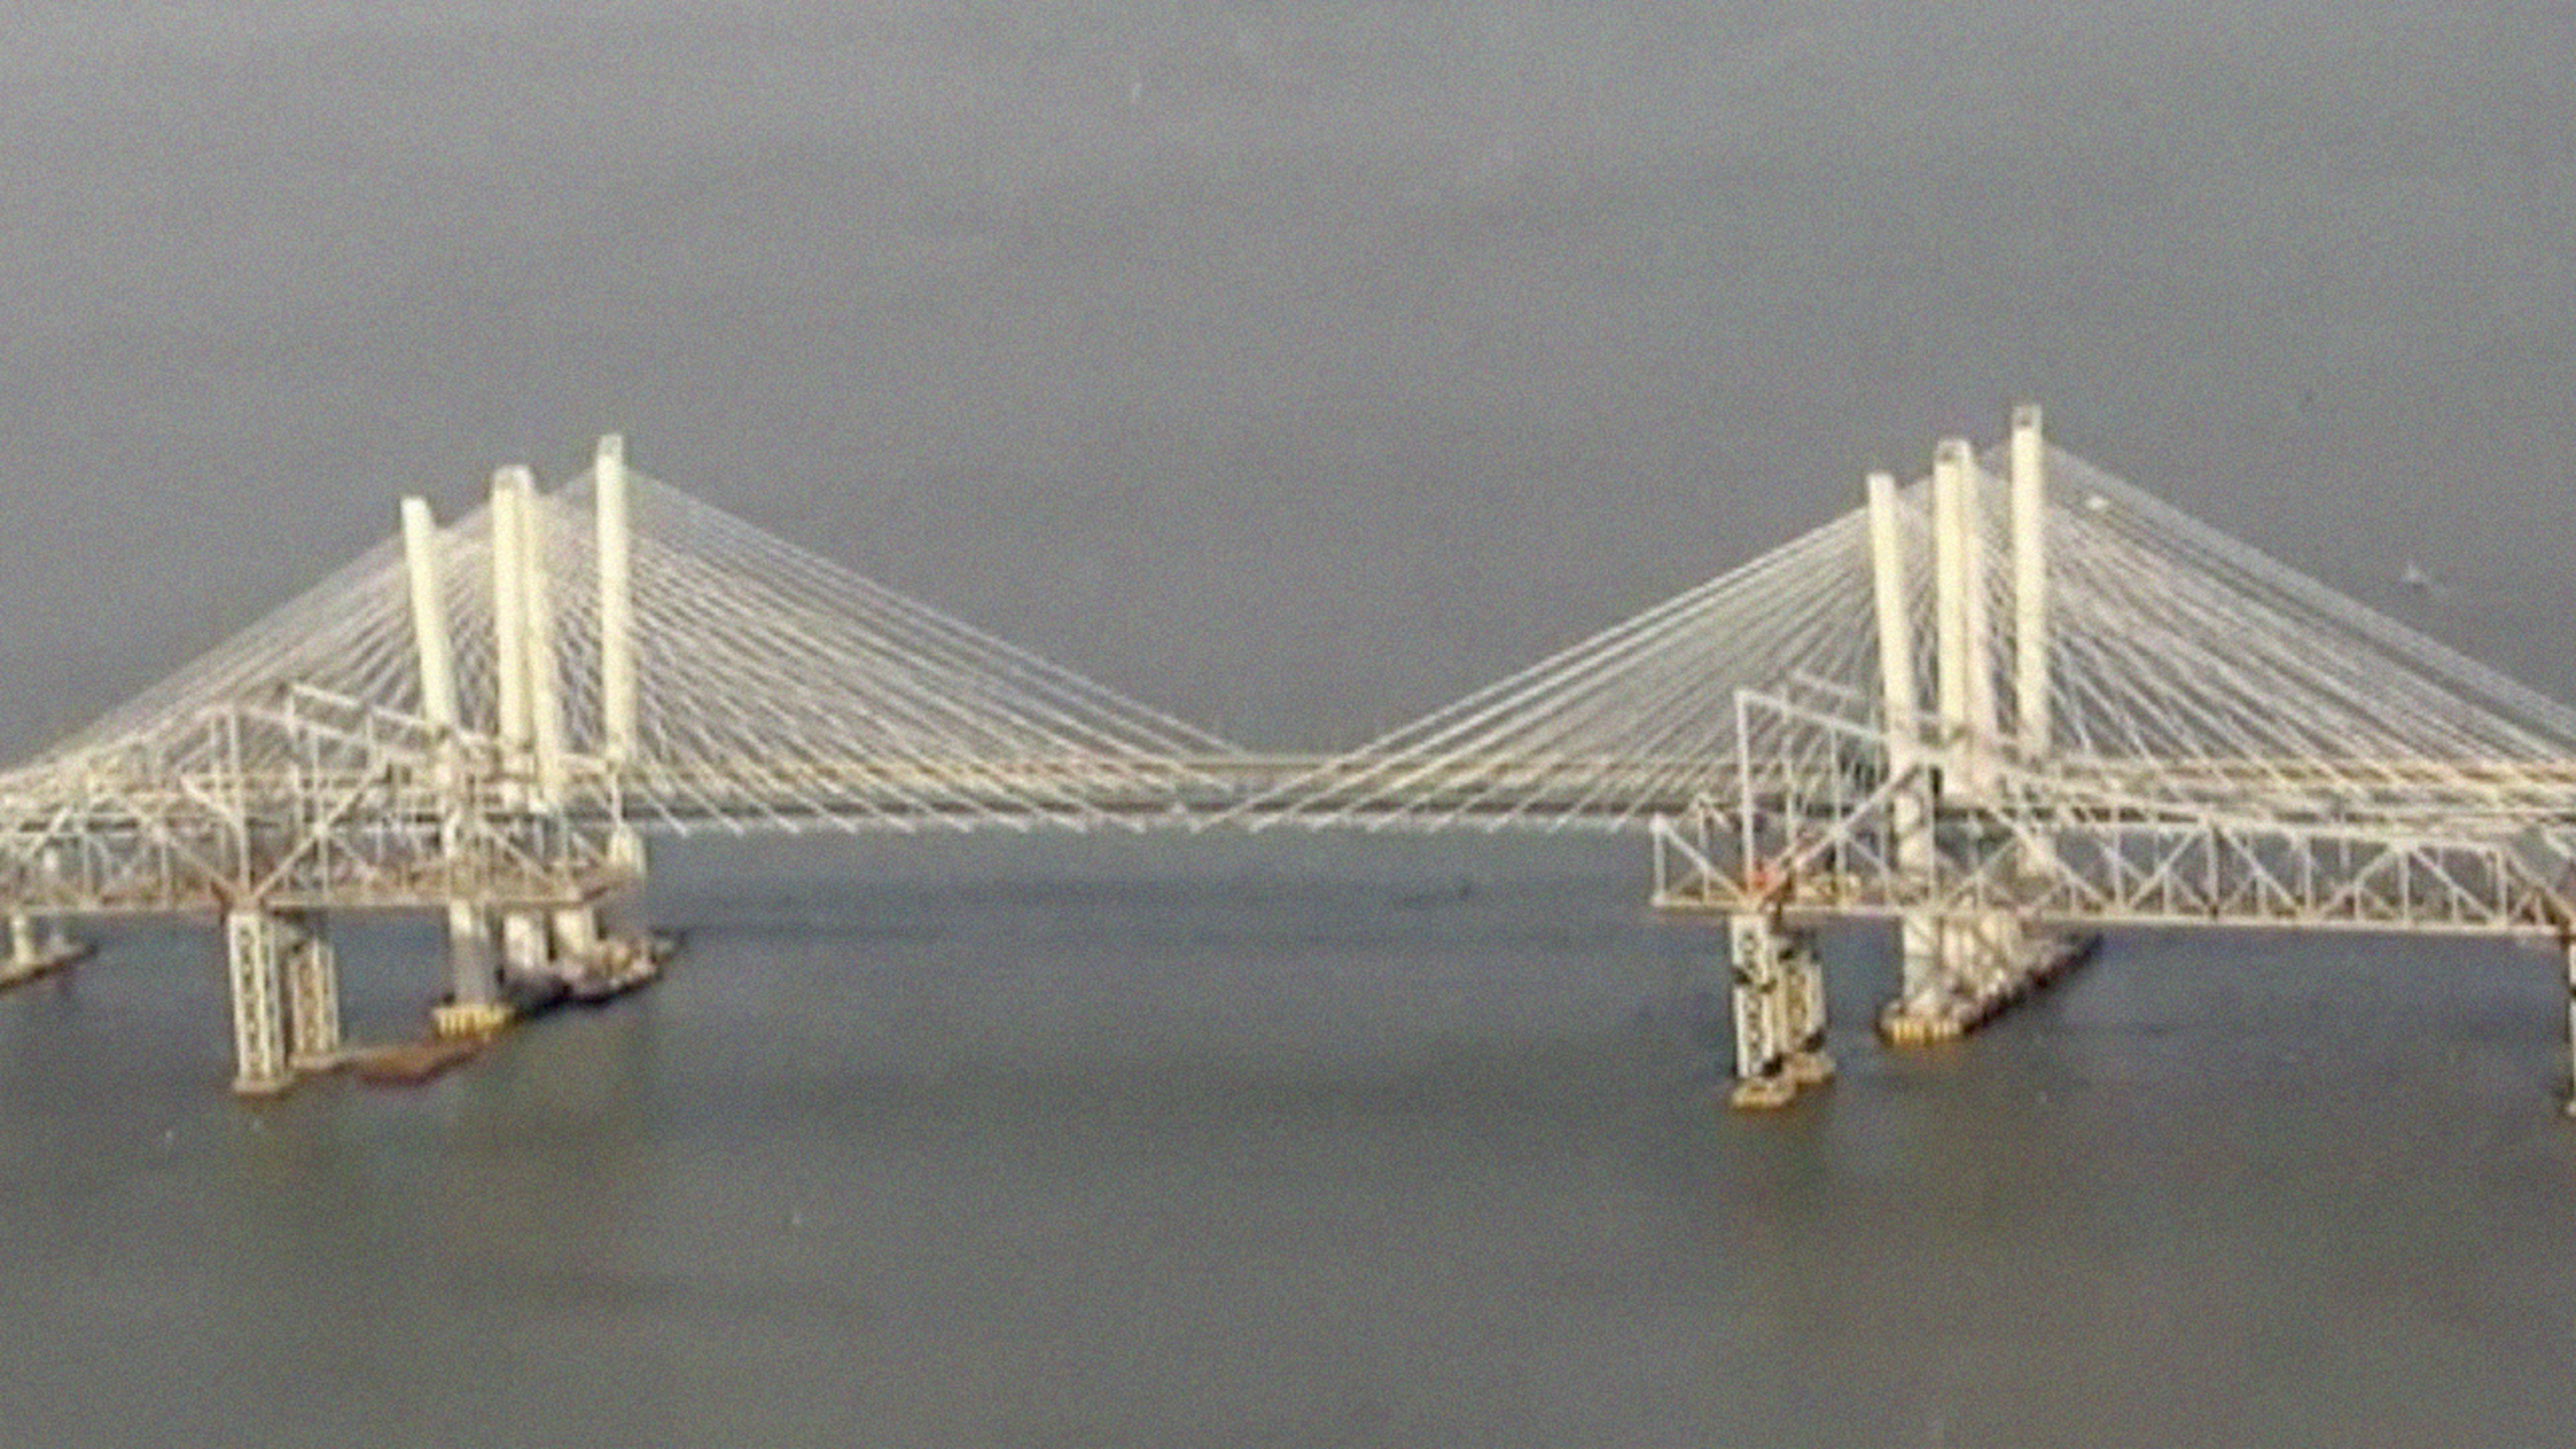 You know you want to watch the Tappan Zee Bridge explode